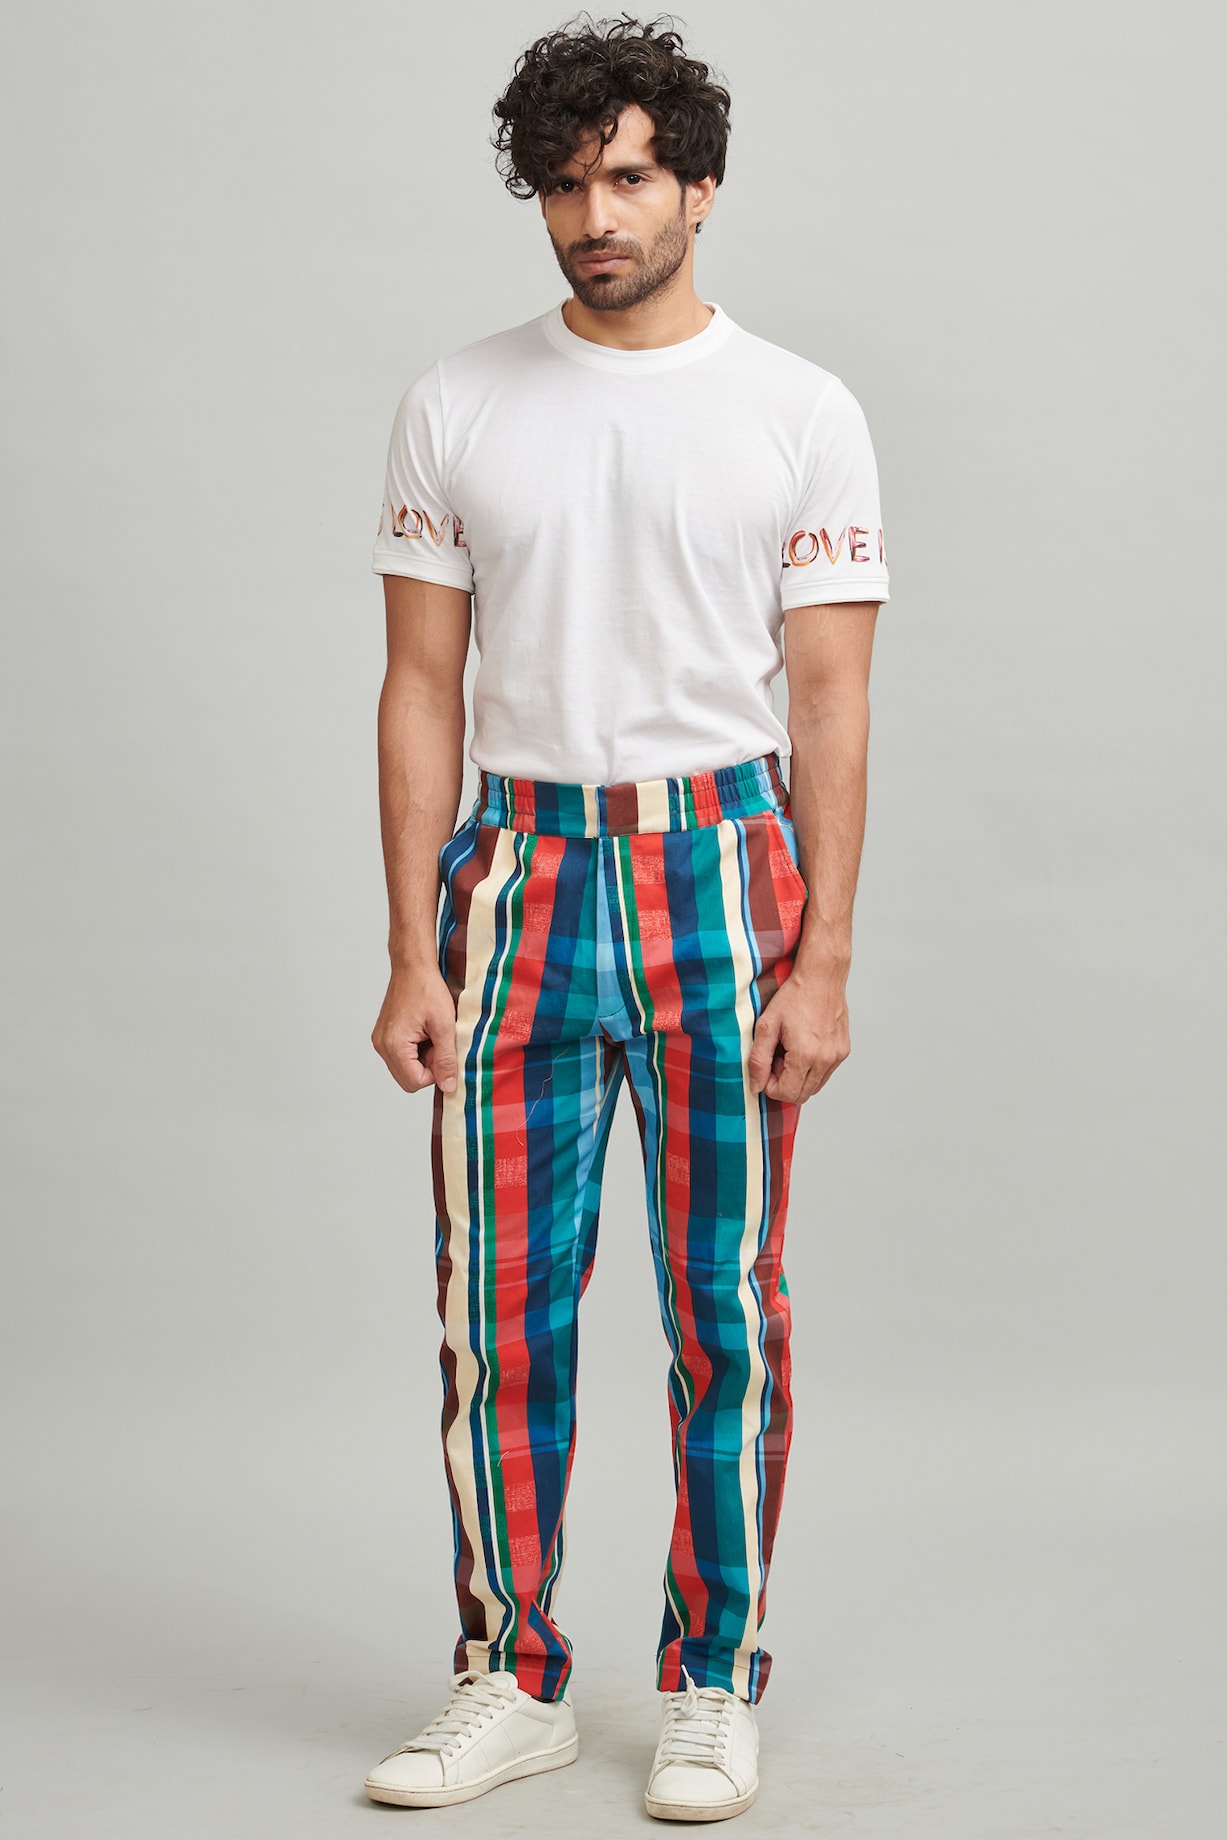 https://img.perniaspopupshop.com/catalog/product/d/a/DADM092186_1.jpg?impolicy=zoomimage